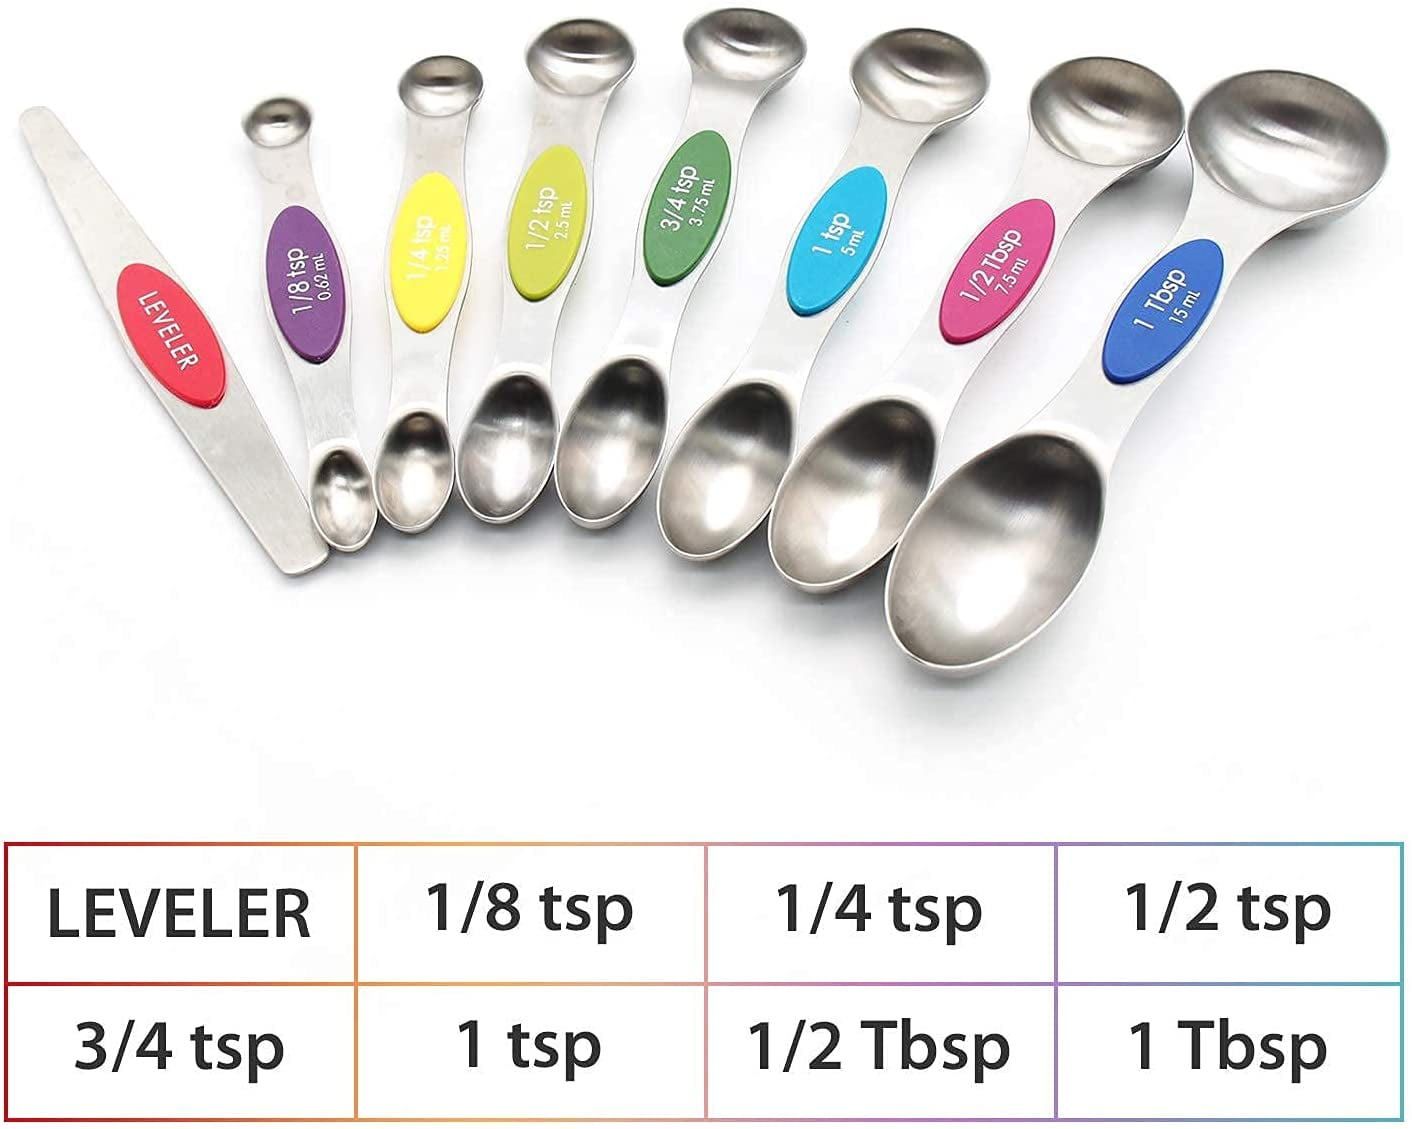 Deiss Pro Heavy Duty Stainless Steel Measuring Spoons for Cooking Spices Dry or Liquid Ingredients Fits in Spice Jar Adjustable Measuring Spoon Set